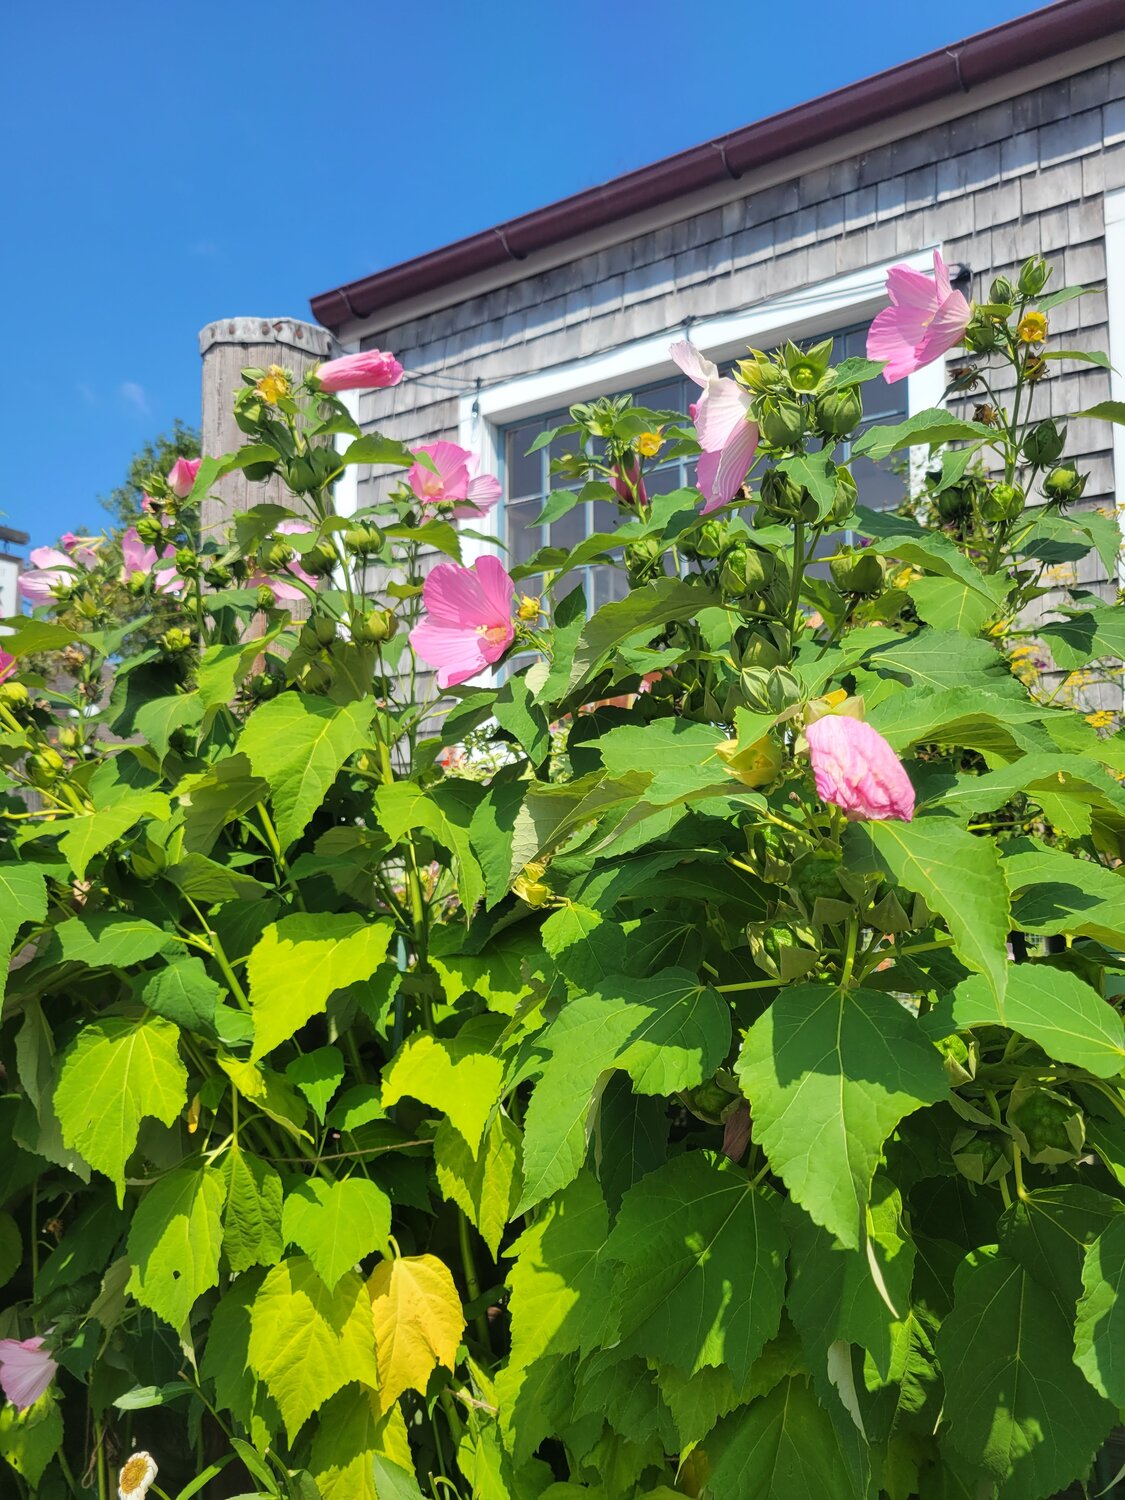 Native rose mallow on Straight Wharf. The bright pink flowers are all over the island.